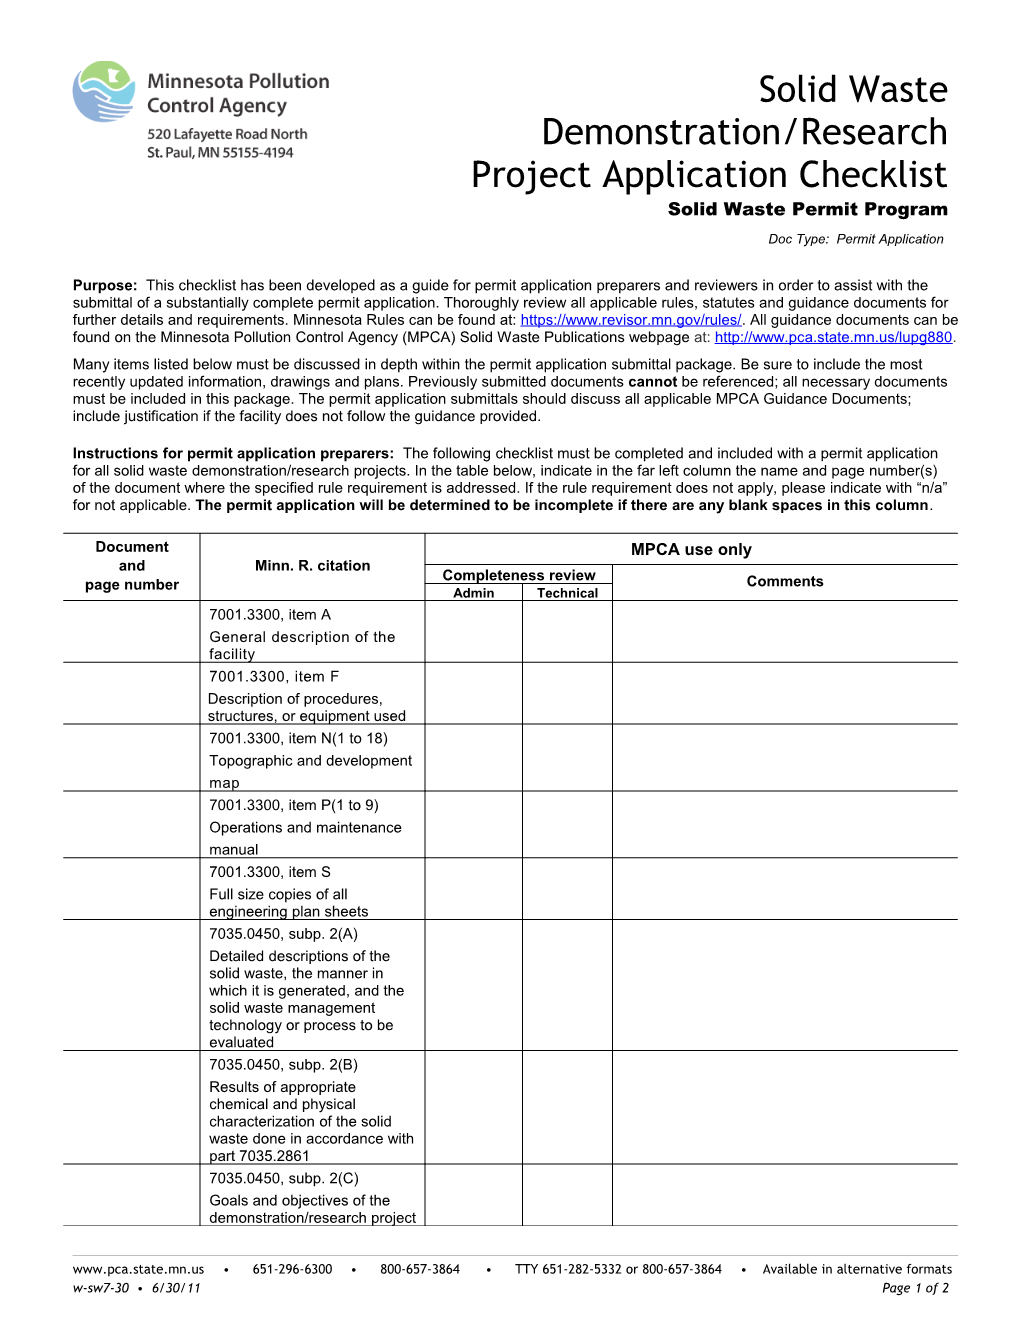 Solid Waste Demonstration/Research Project Application Checklist - Form